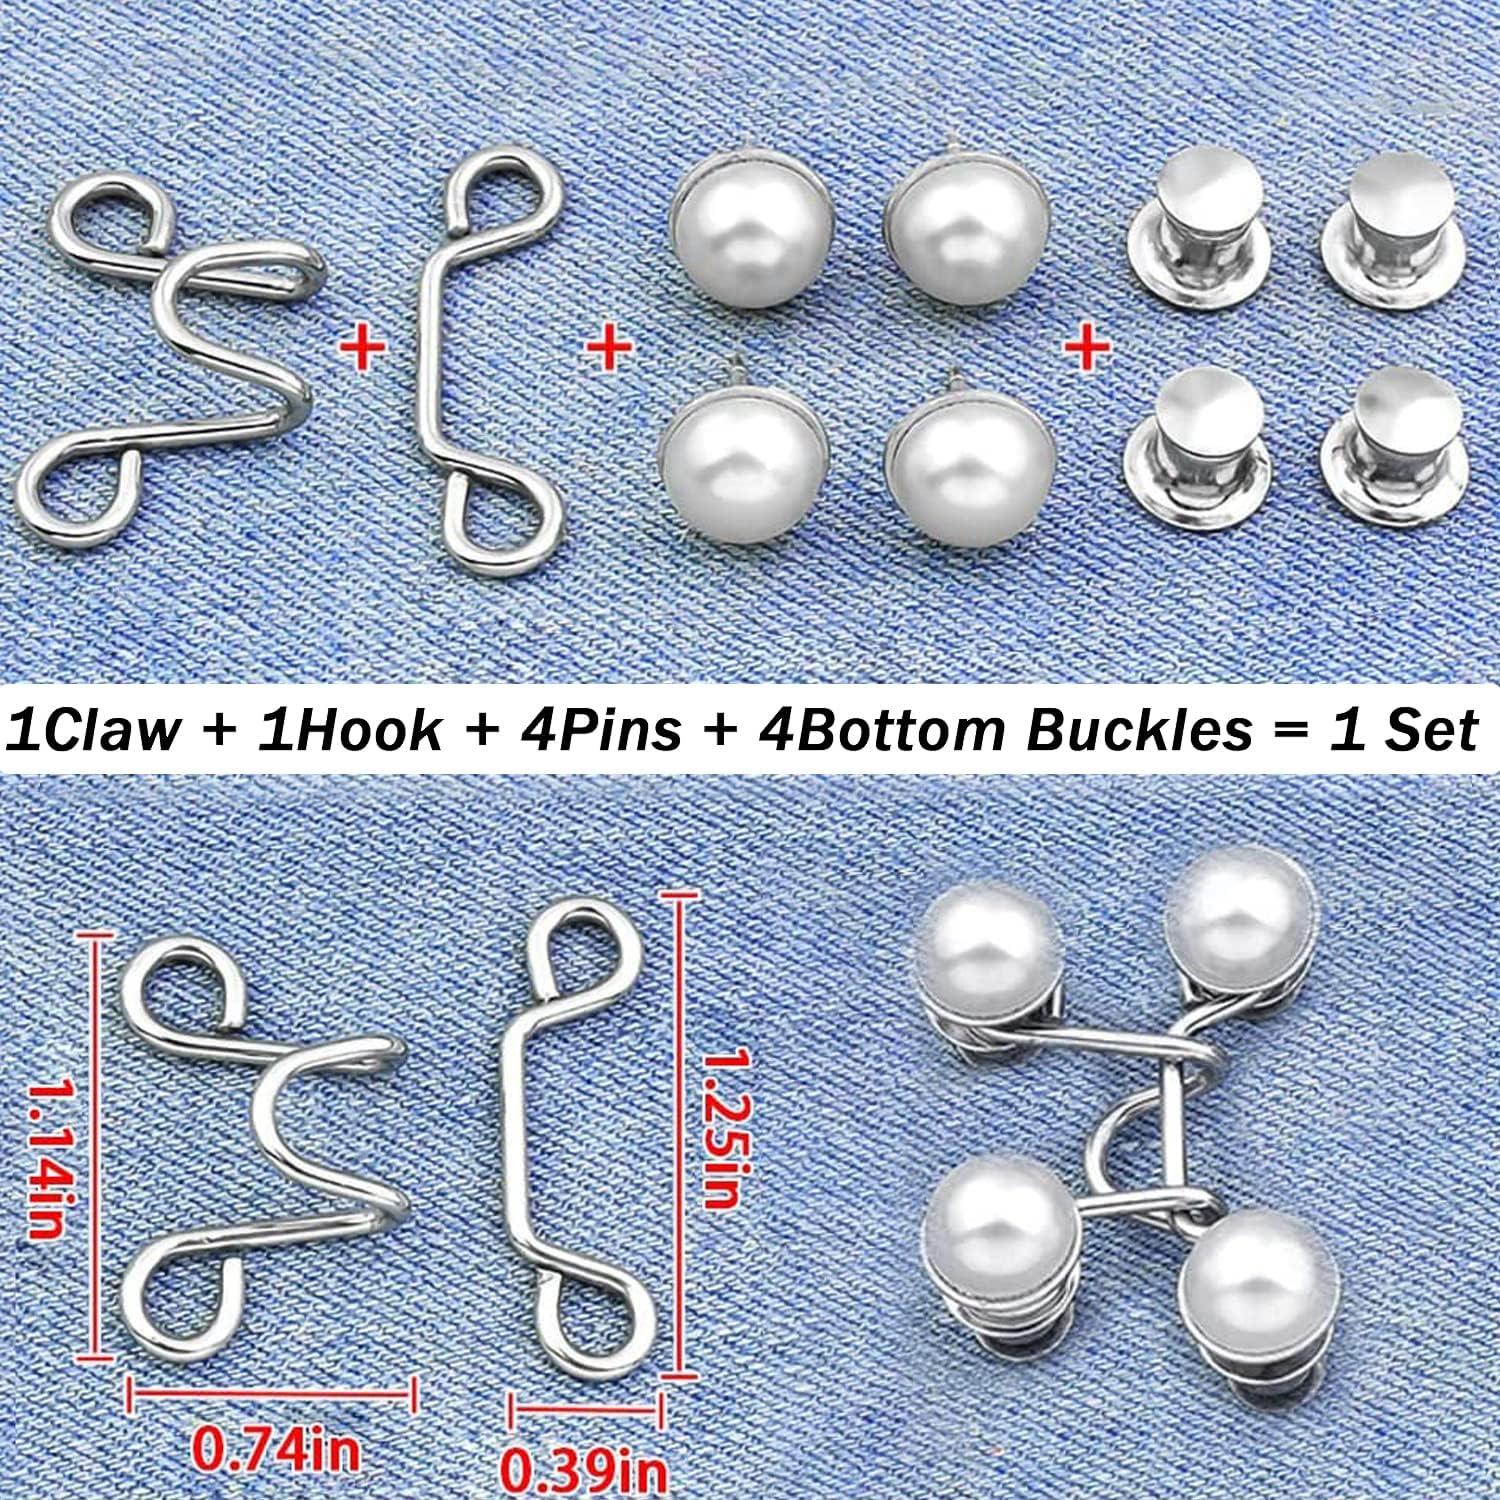 8 Sets Button Pins For Jeans, 4 Styles Instant Jean Button Pins